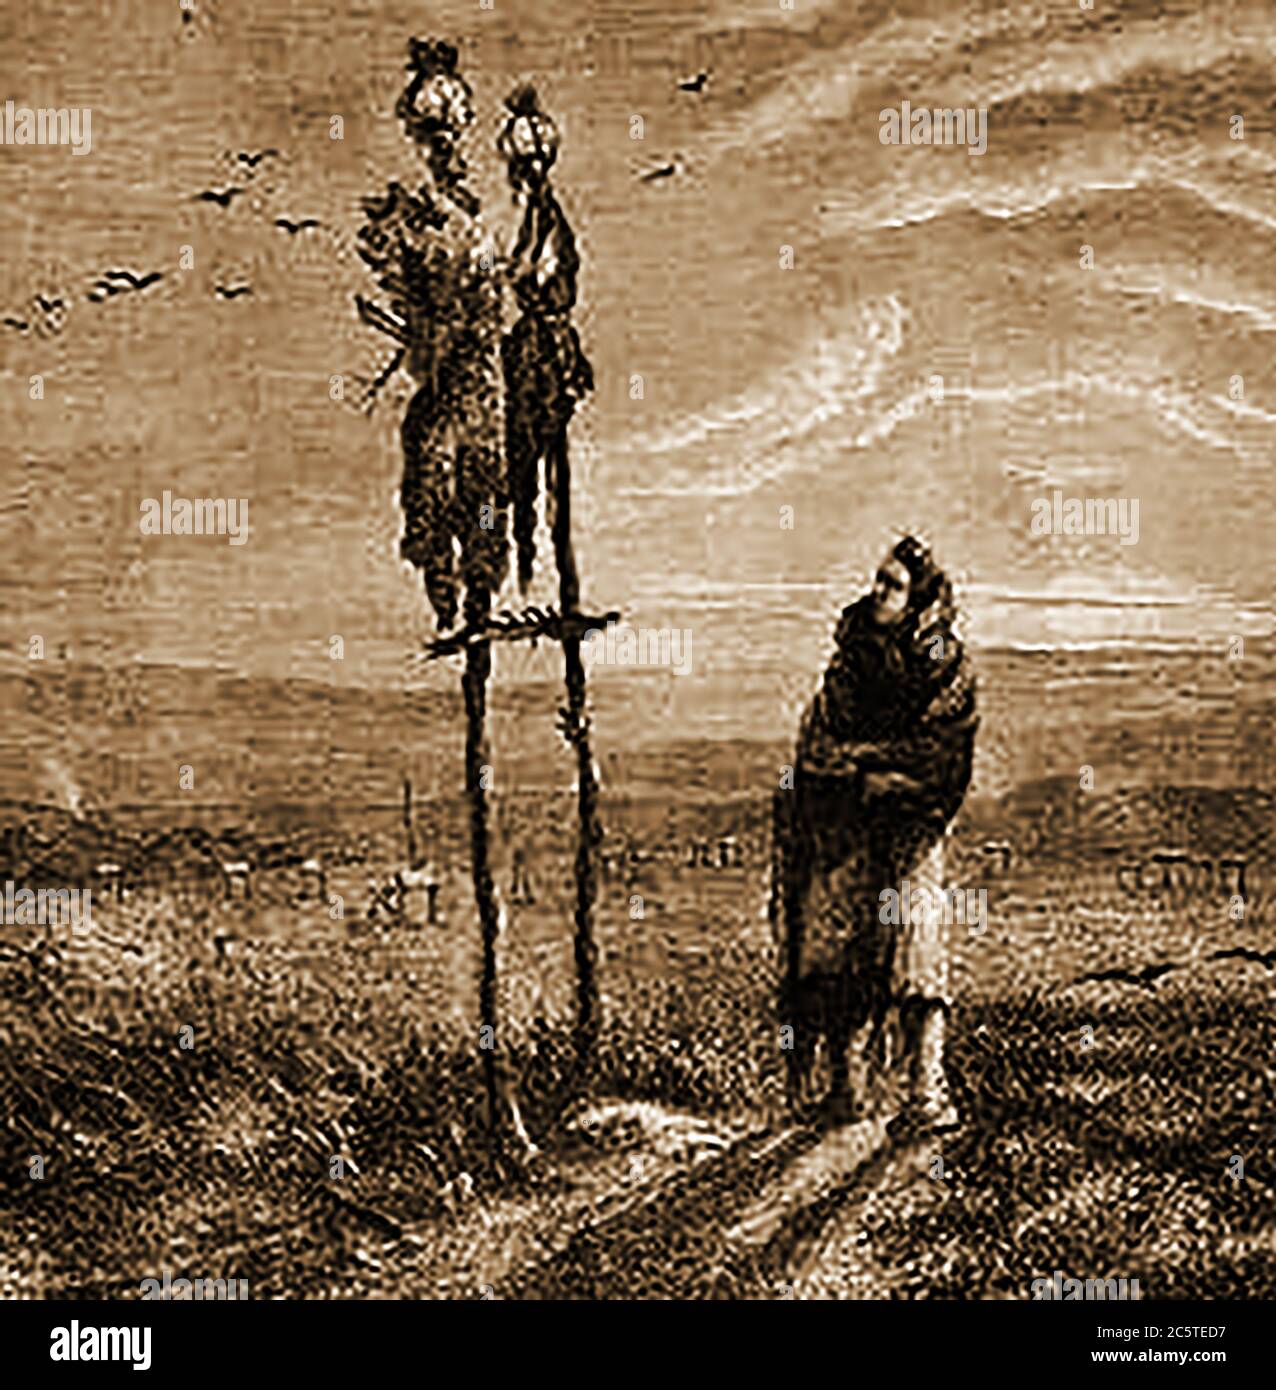 An 1880 illustration from the 'Illustrated Missionary News'. The magazine was formerly published under the title  The Pictorial missionary news edited by Henry Grattan Guinness (1835  - 1910) who was an Irish Protestant Christian preacher, evangelist and author (and others). This picture shows  A Mandan sky burial cemetery in North West America.The Mandan are a Native American tribe of the Great Plains who have lived for centuries mostly in what is now North Dakota. Stock Photo